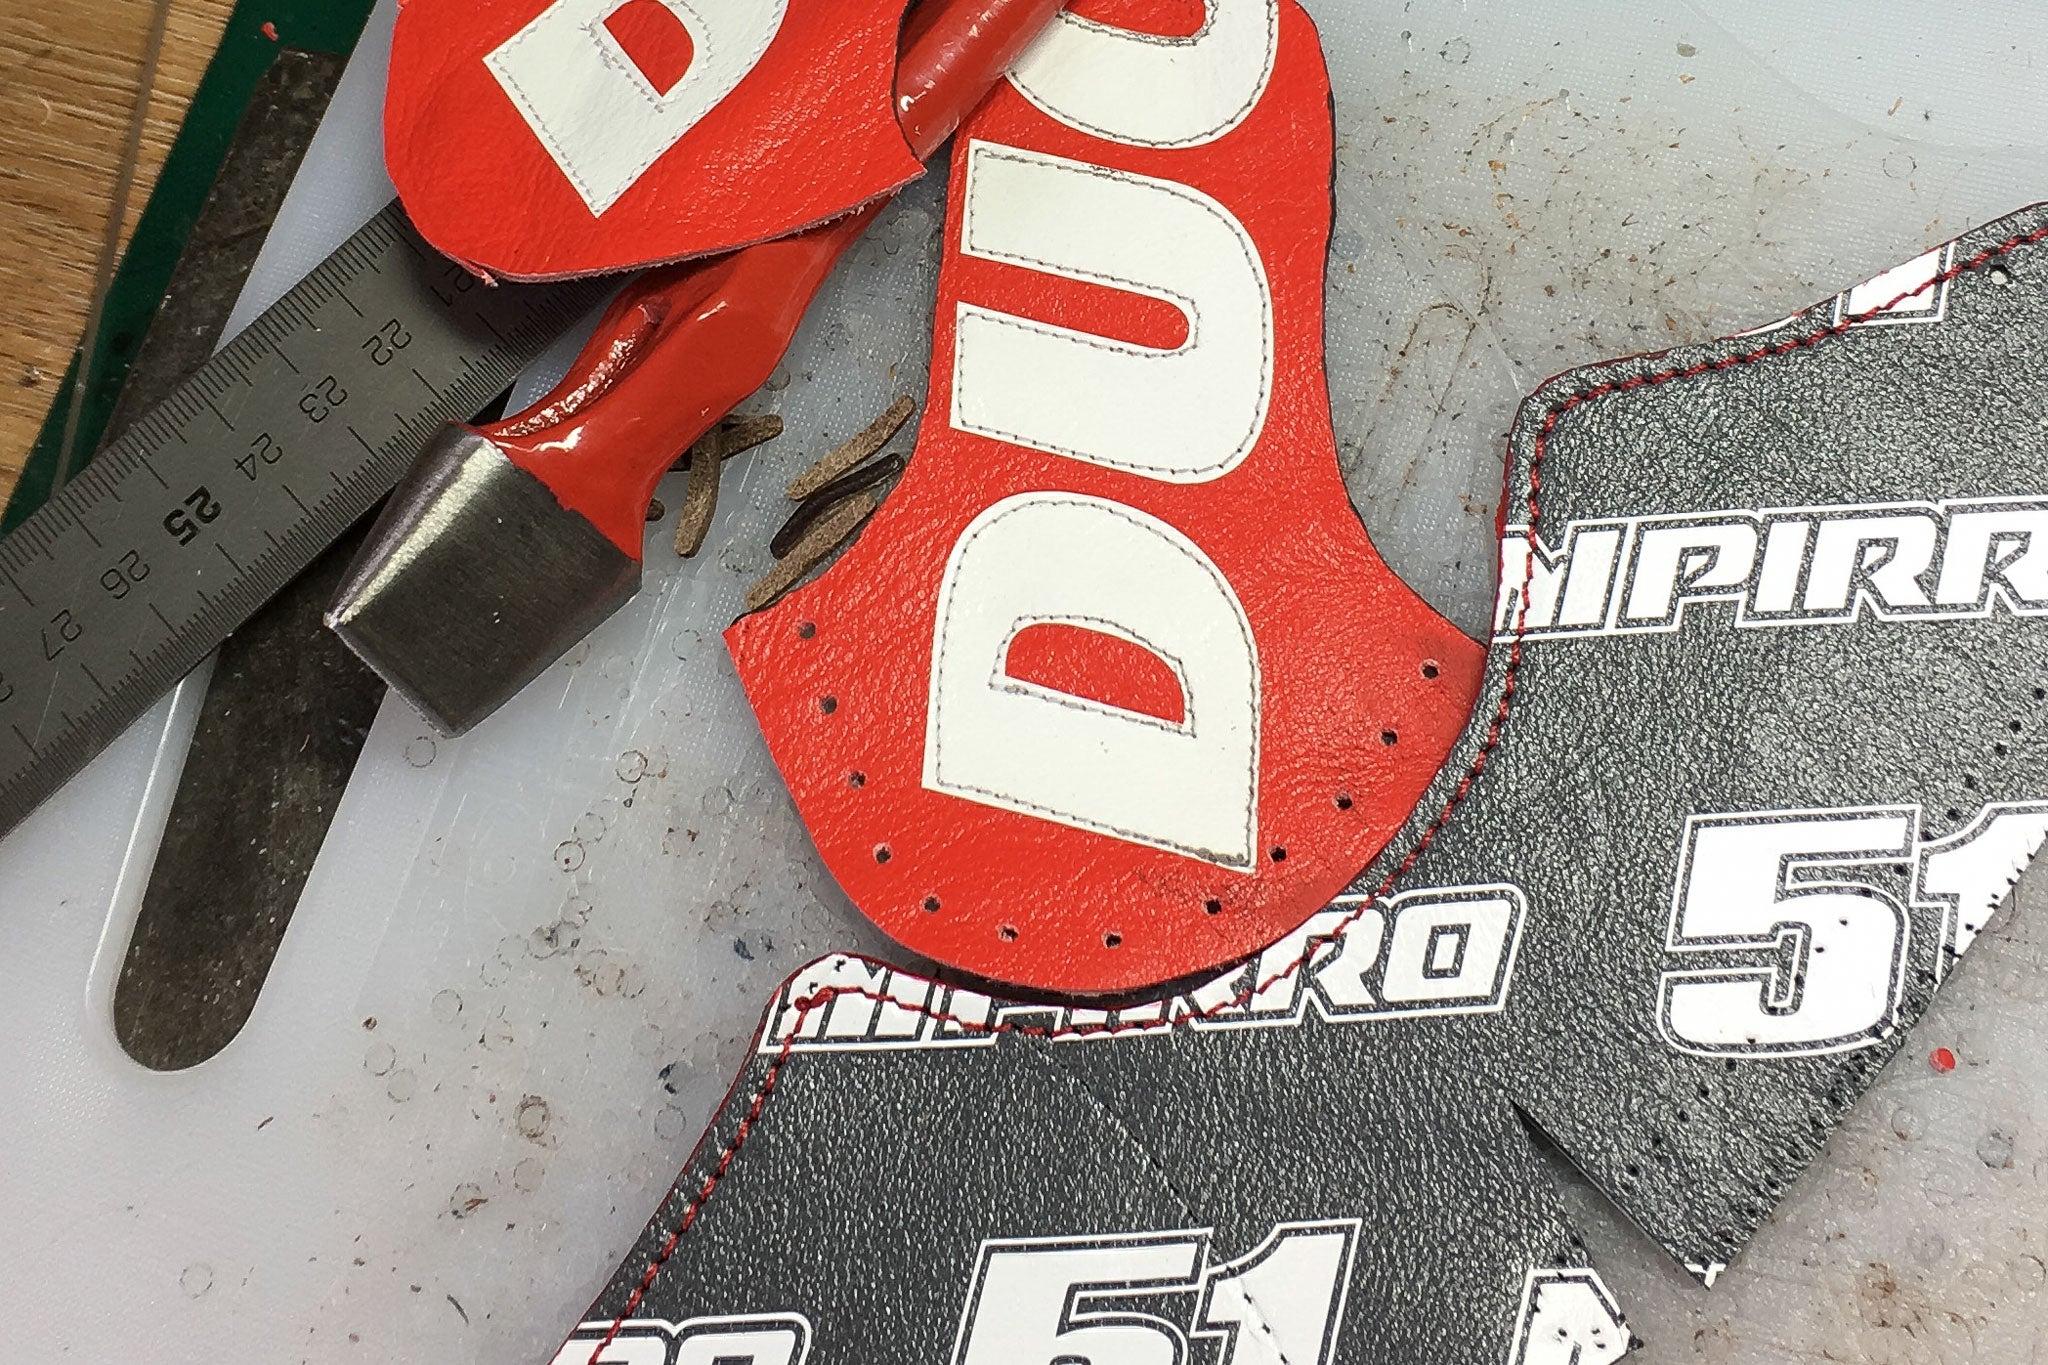 Adding the Ducati branded parts to the pattern